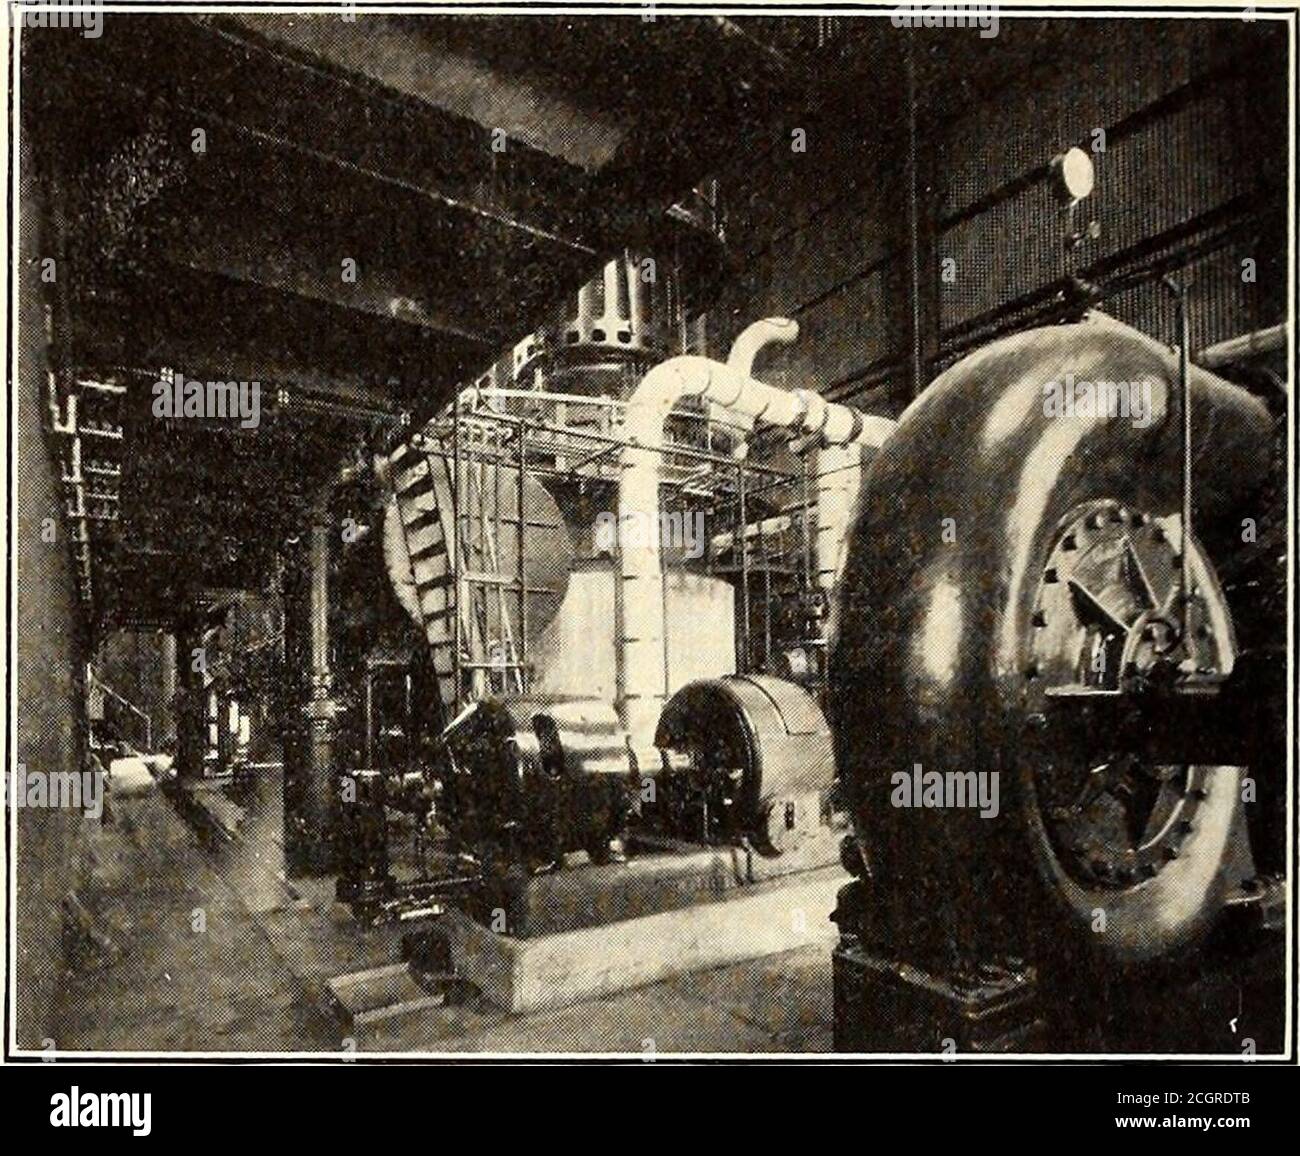 . The Street railway journal . platform in the section containing the turbines and auxil-iaries. This comprises the following: Two four-stage,75-kw, 2400-r. p. m., 120-volt Curtis turbo-generators forexciting the large turbines; two 25-cycle, 2000-kw air-blasttransformers now arranged for 2300 volts primary and 19,-100 volts secondary; two 25-cycle, 5-5o-kw air-blast trans-formers to step-down from 19,100 volts primary to 430 volts. IX THE BOILER ROOM CONDENSING AND FEED-WATER APPARATUS SECTION side end packed plunger type with pressure pattern waterends, the water valves being of the brass wi Stock Photo